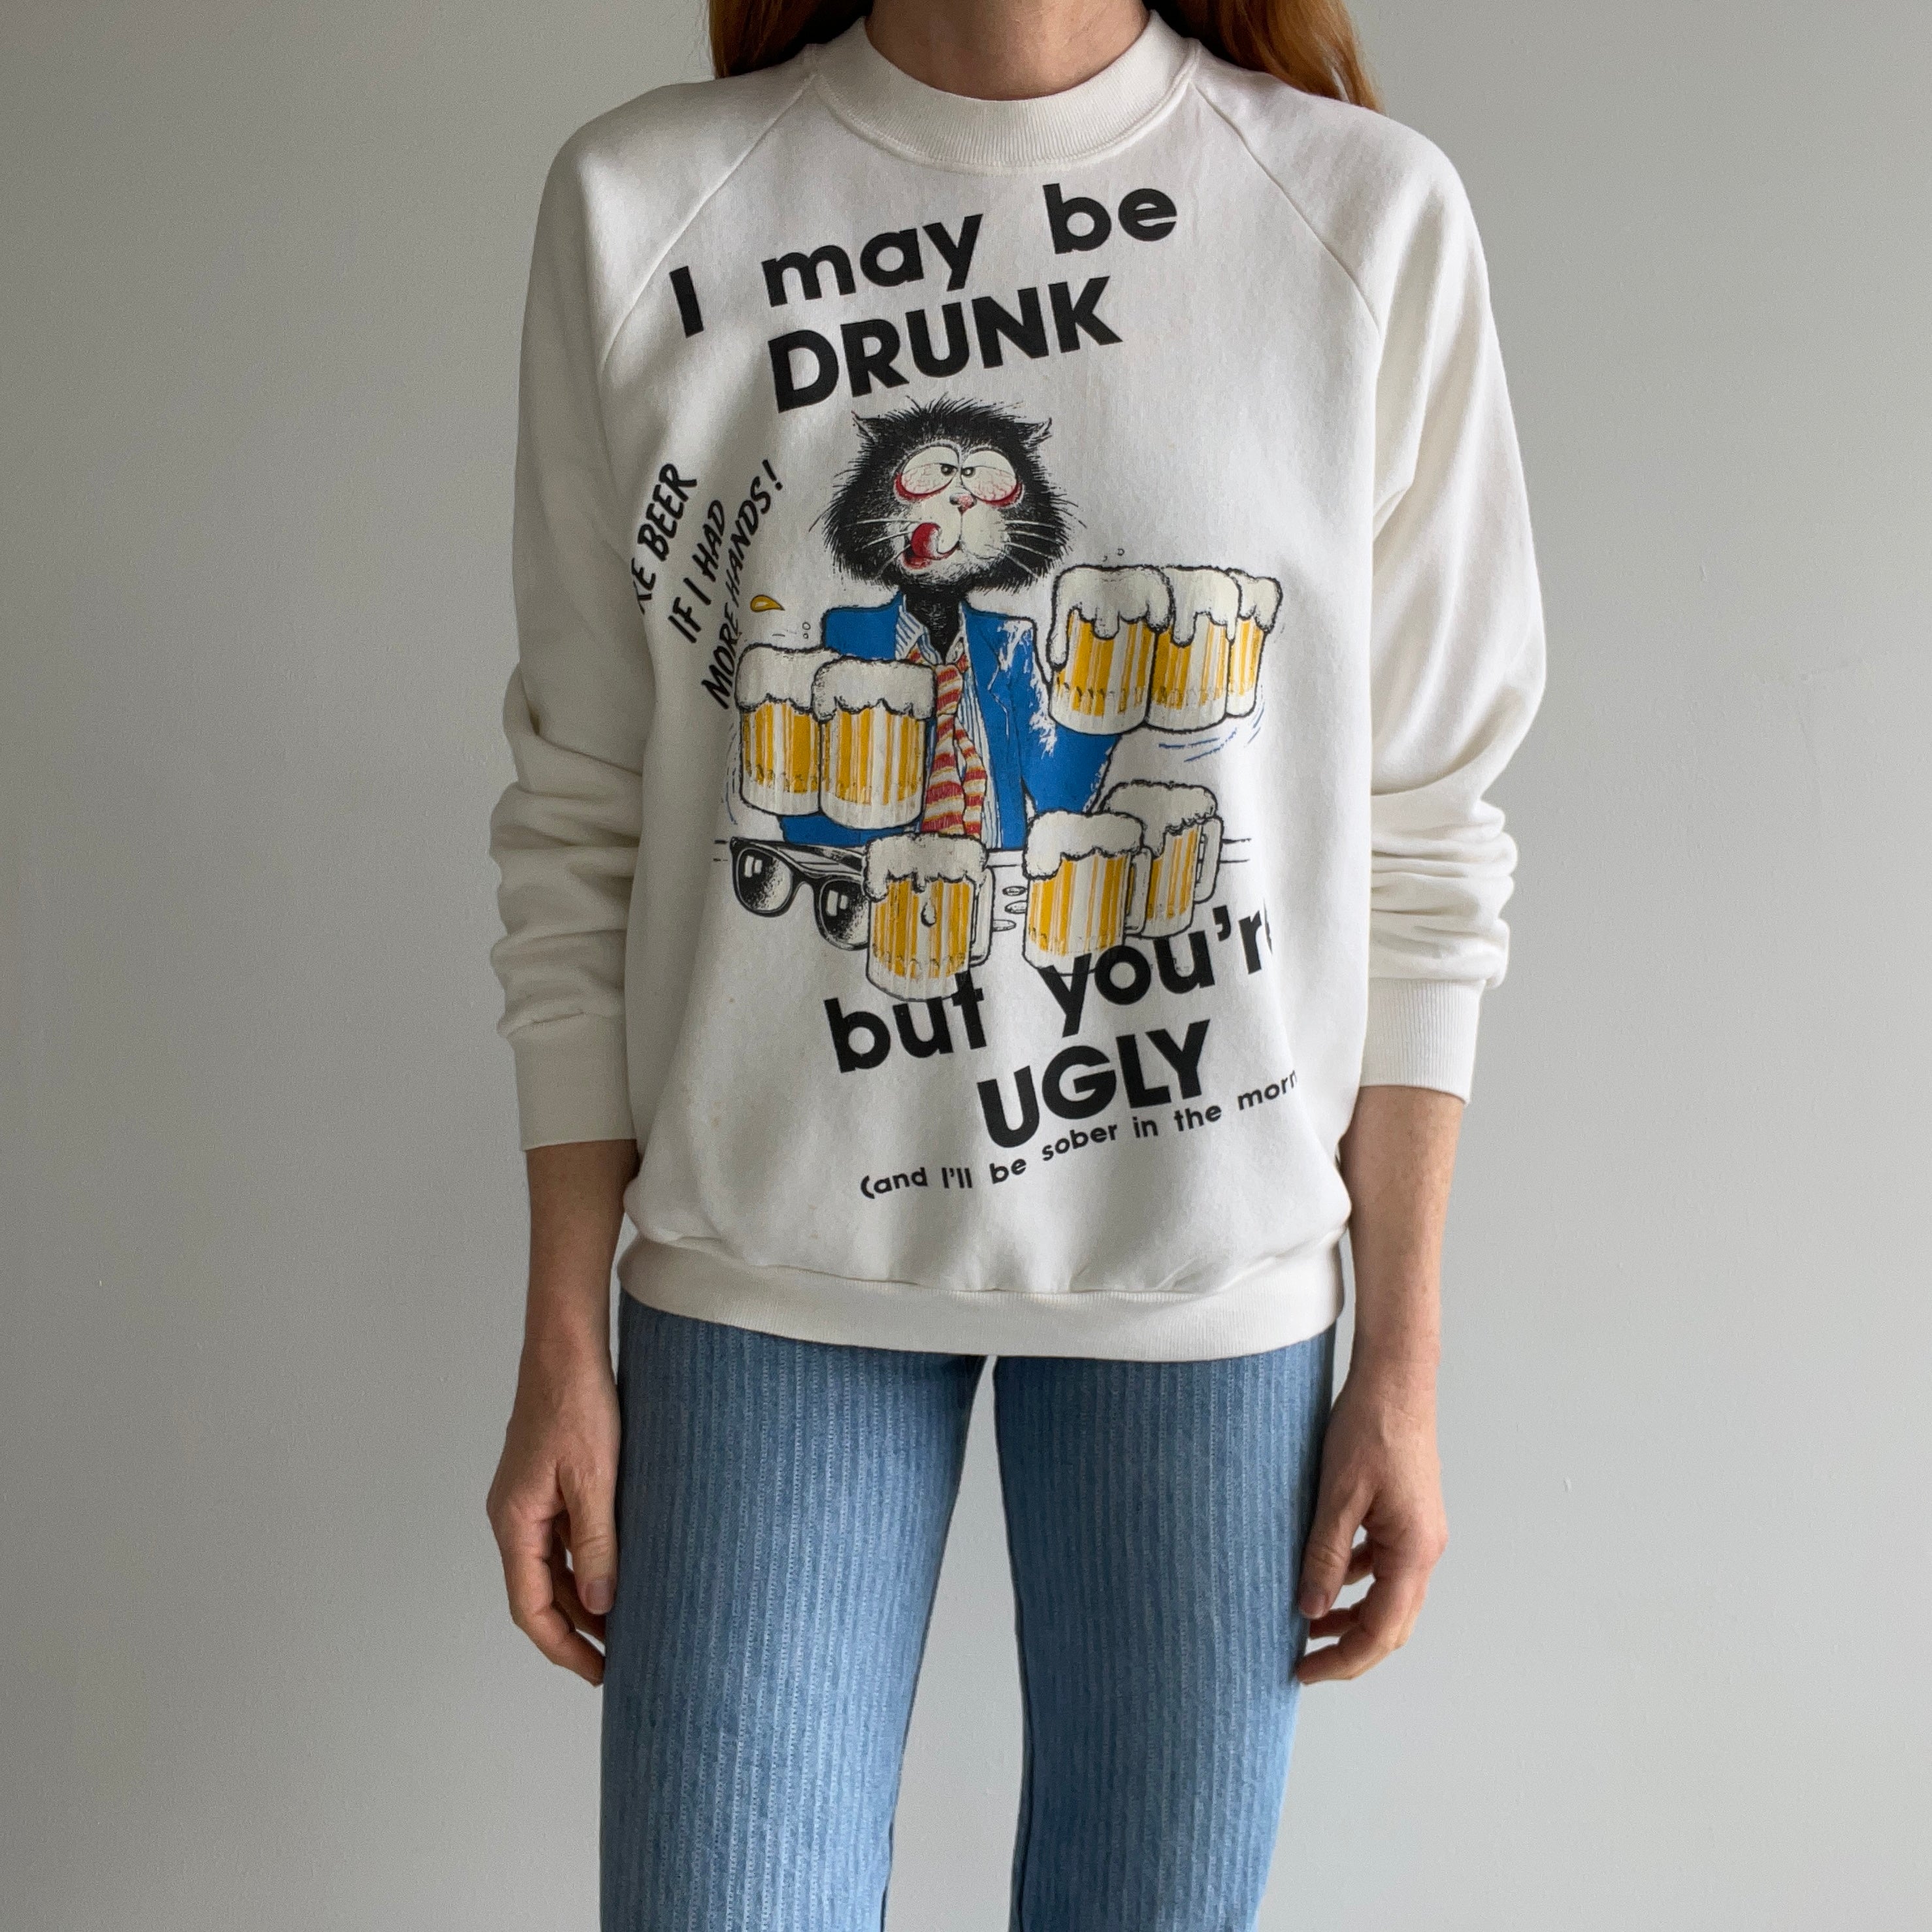 1980s Highly Inappropriate, Rude and Mean Sweatshirt You Shouldn't Buy